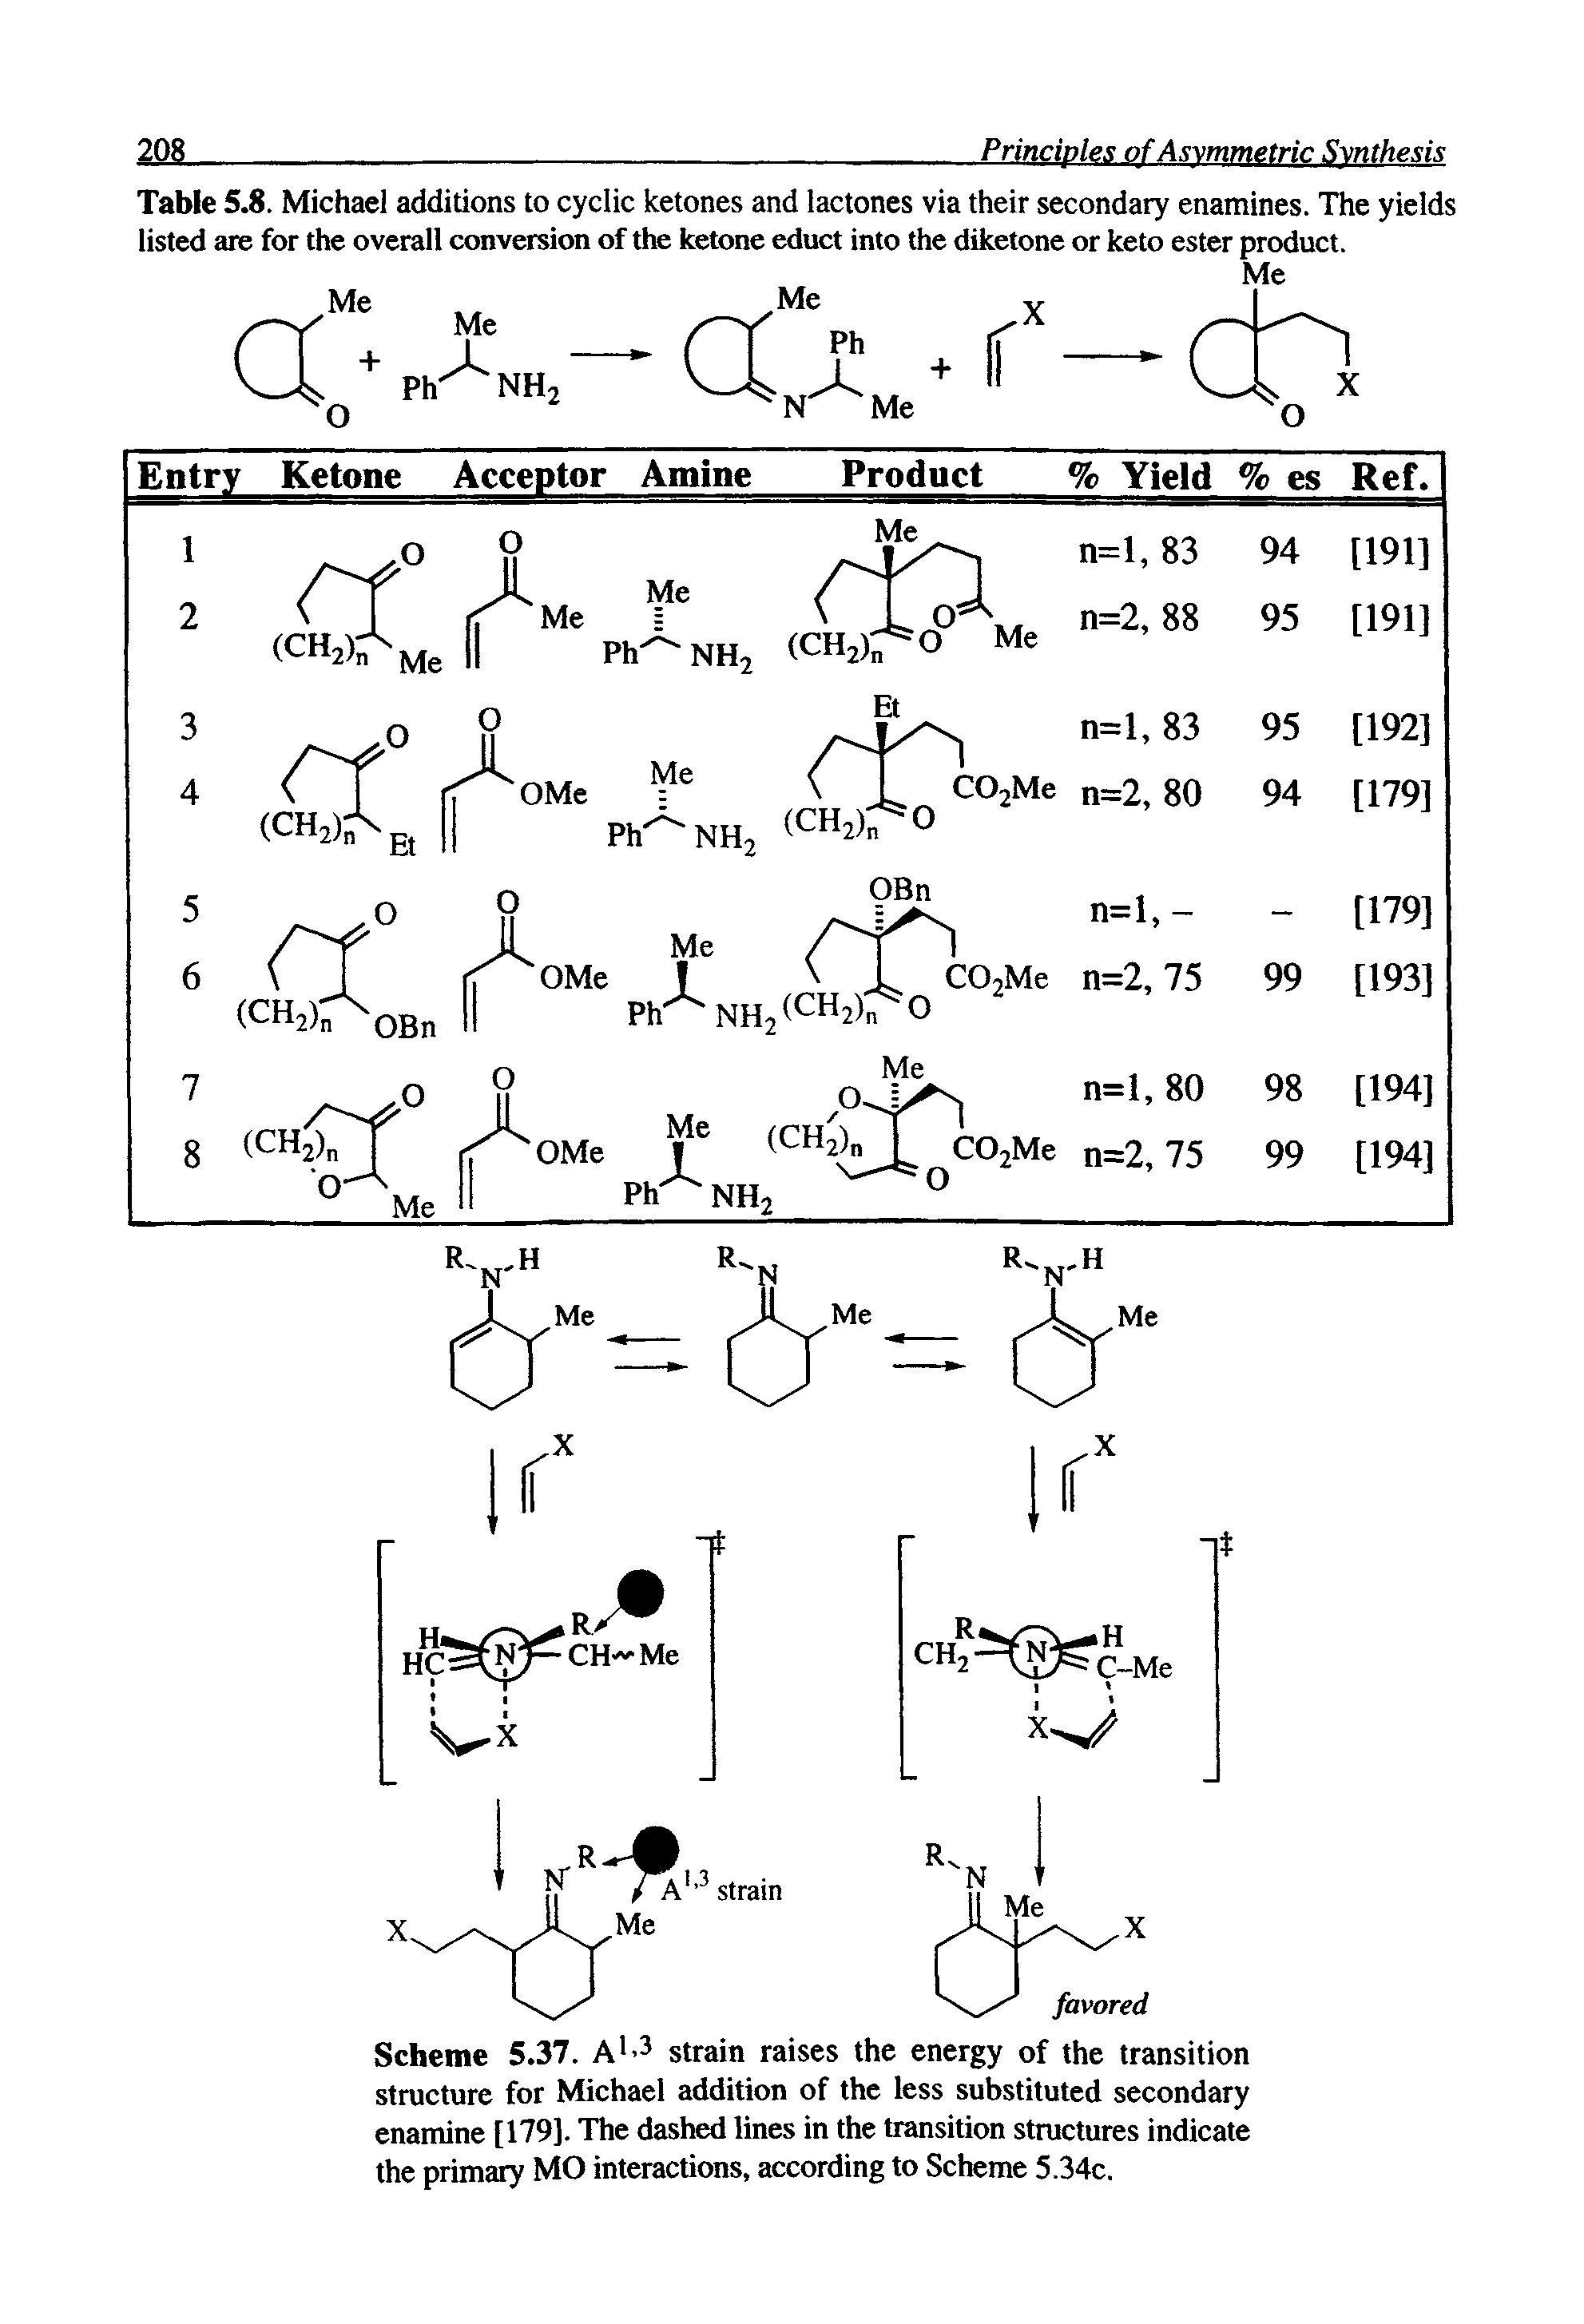 Scheme 5.37. AT3 strain raises the energy of the transition structure for Michael addition of the less substituted secondary enamine [179]. The dashed lines in the transition structures indicate the primary MO interactions, according to Scheme 5.34c.